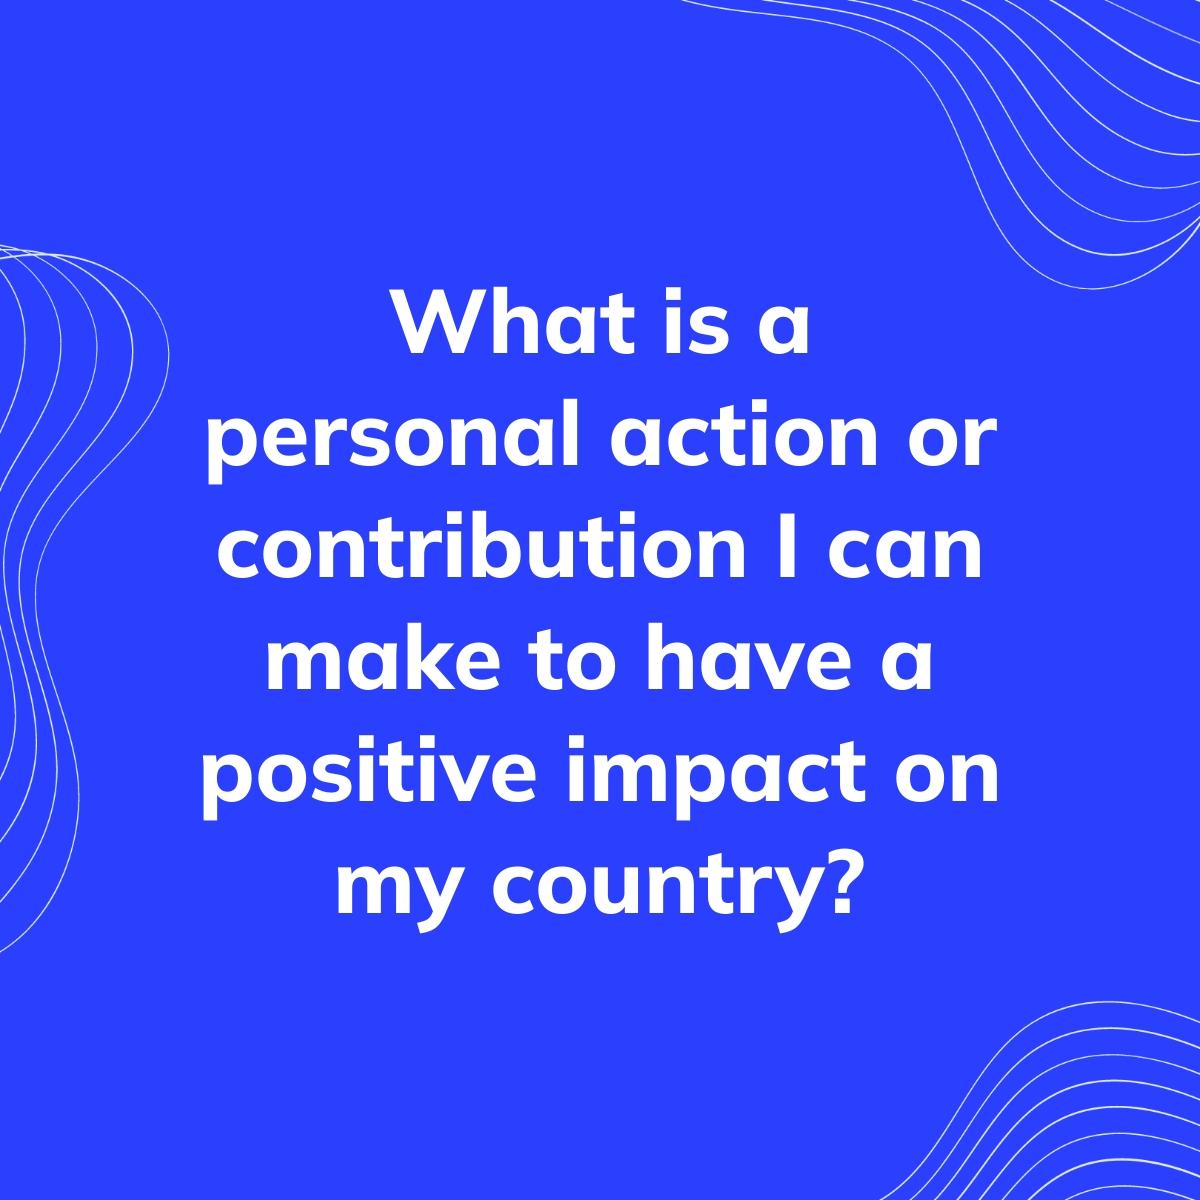 Journal Prompt: What is a personal action or contribution I can make to have a positive impact on my country?